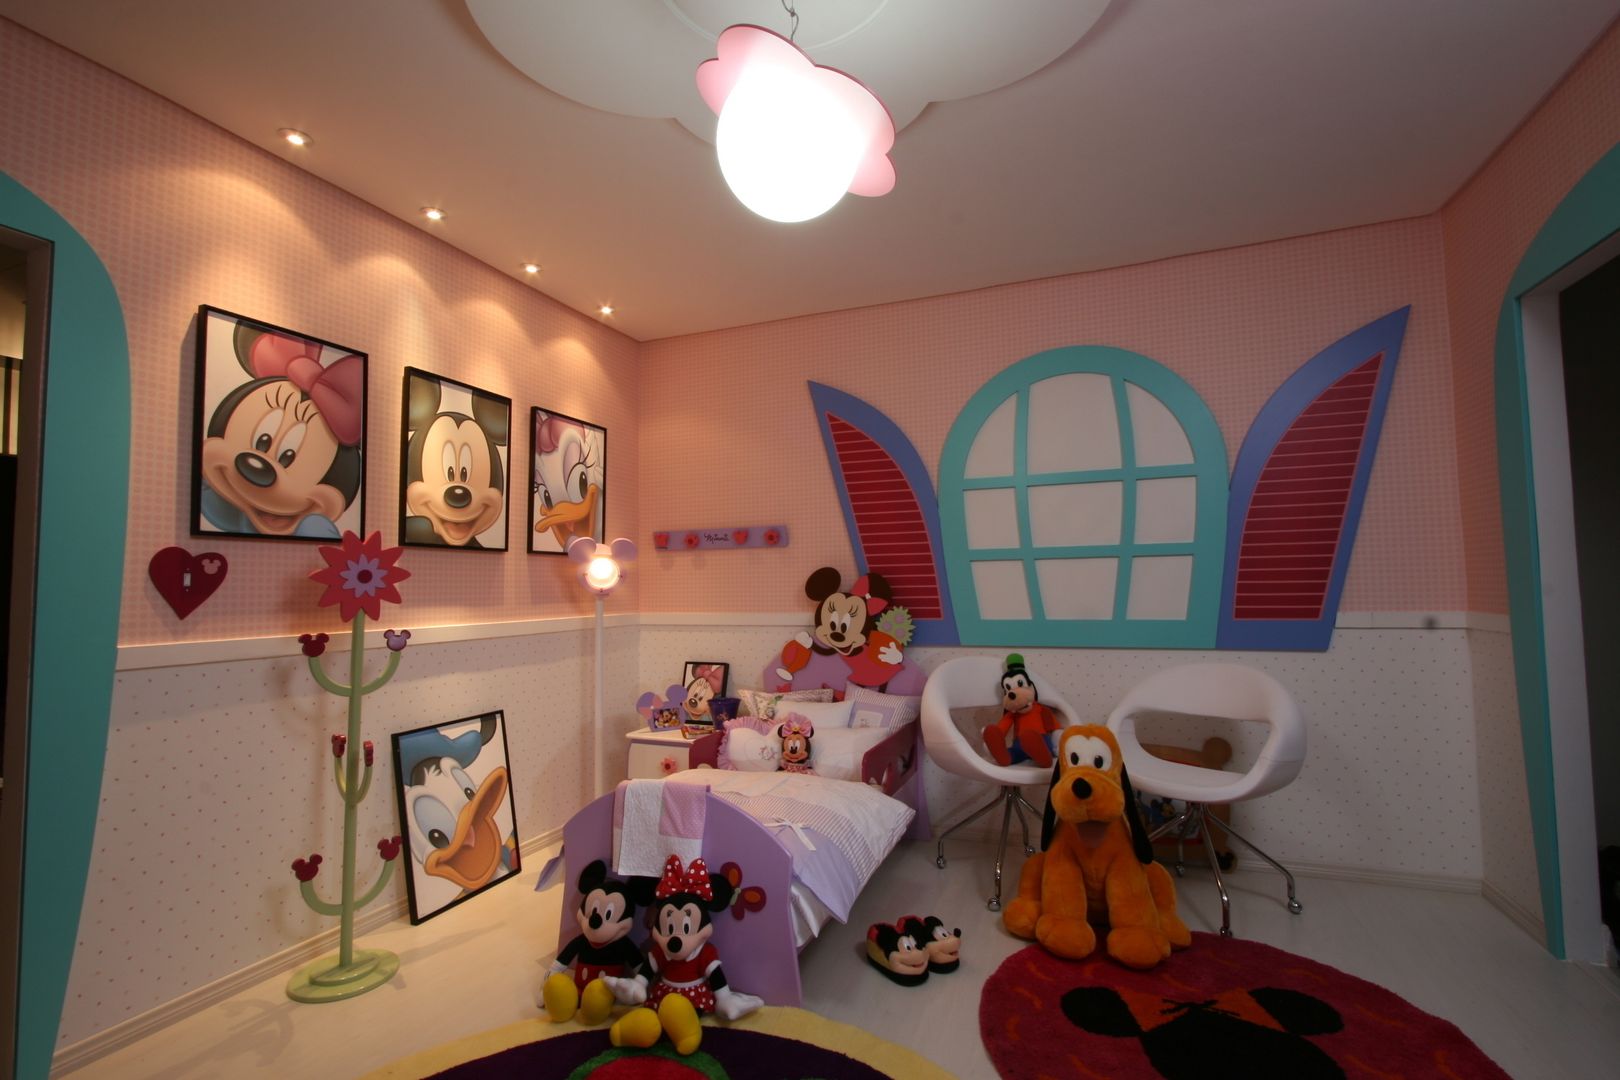 A15 Residência, Canisio Beeck Arquiteto Canisio Beeck Arquiteto Eclectic style nursery/kids room